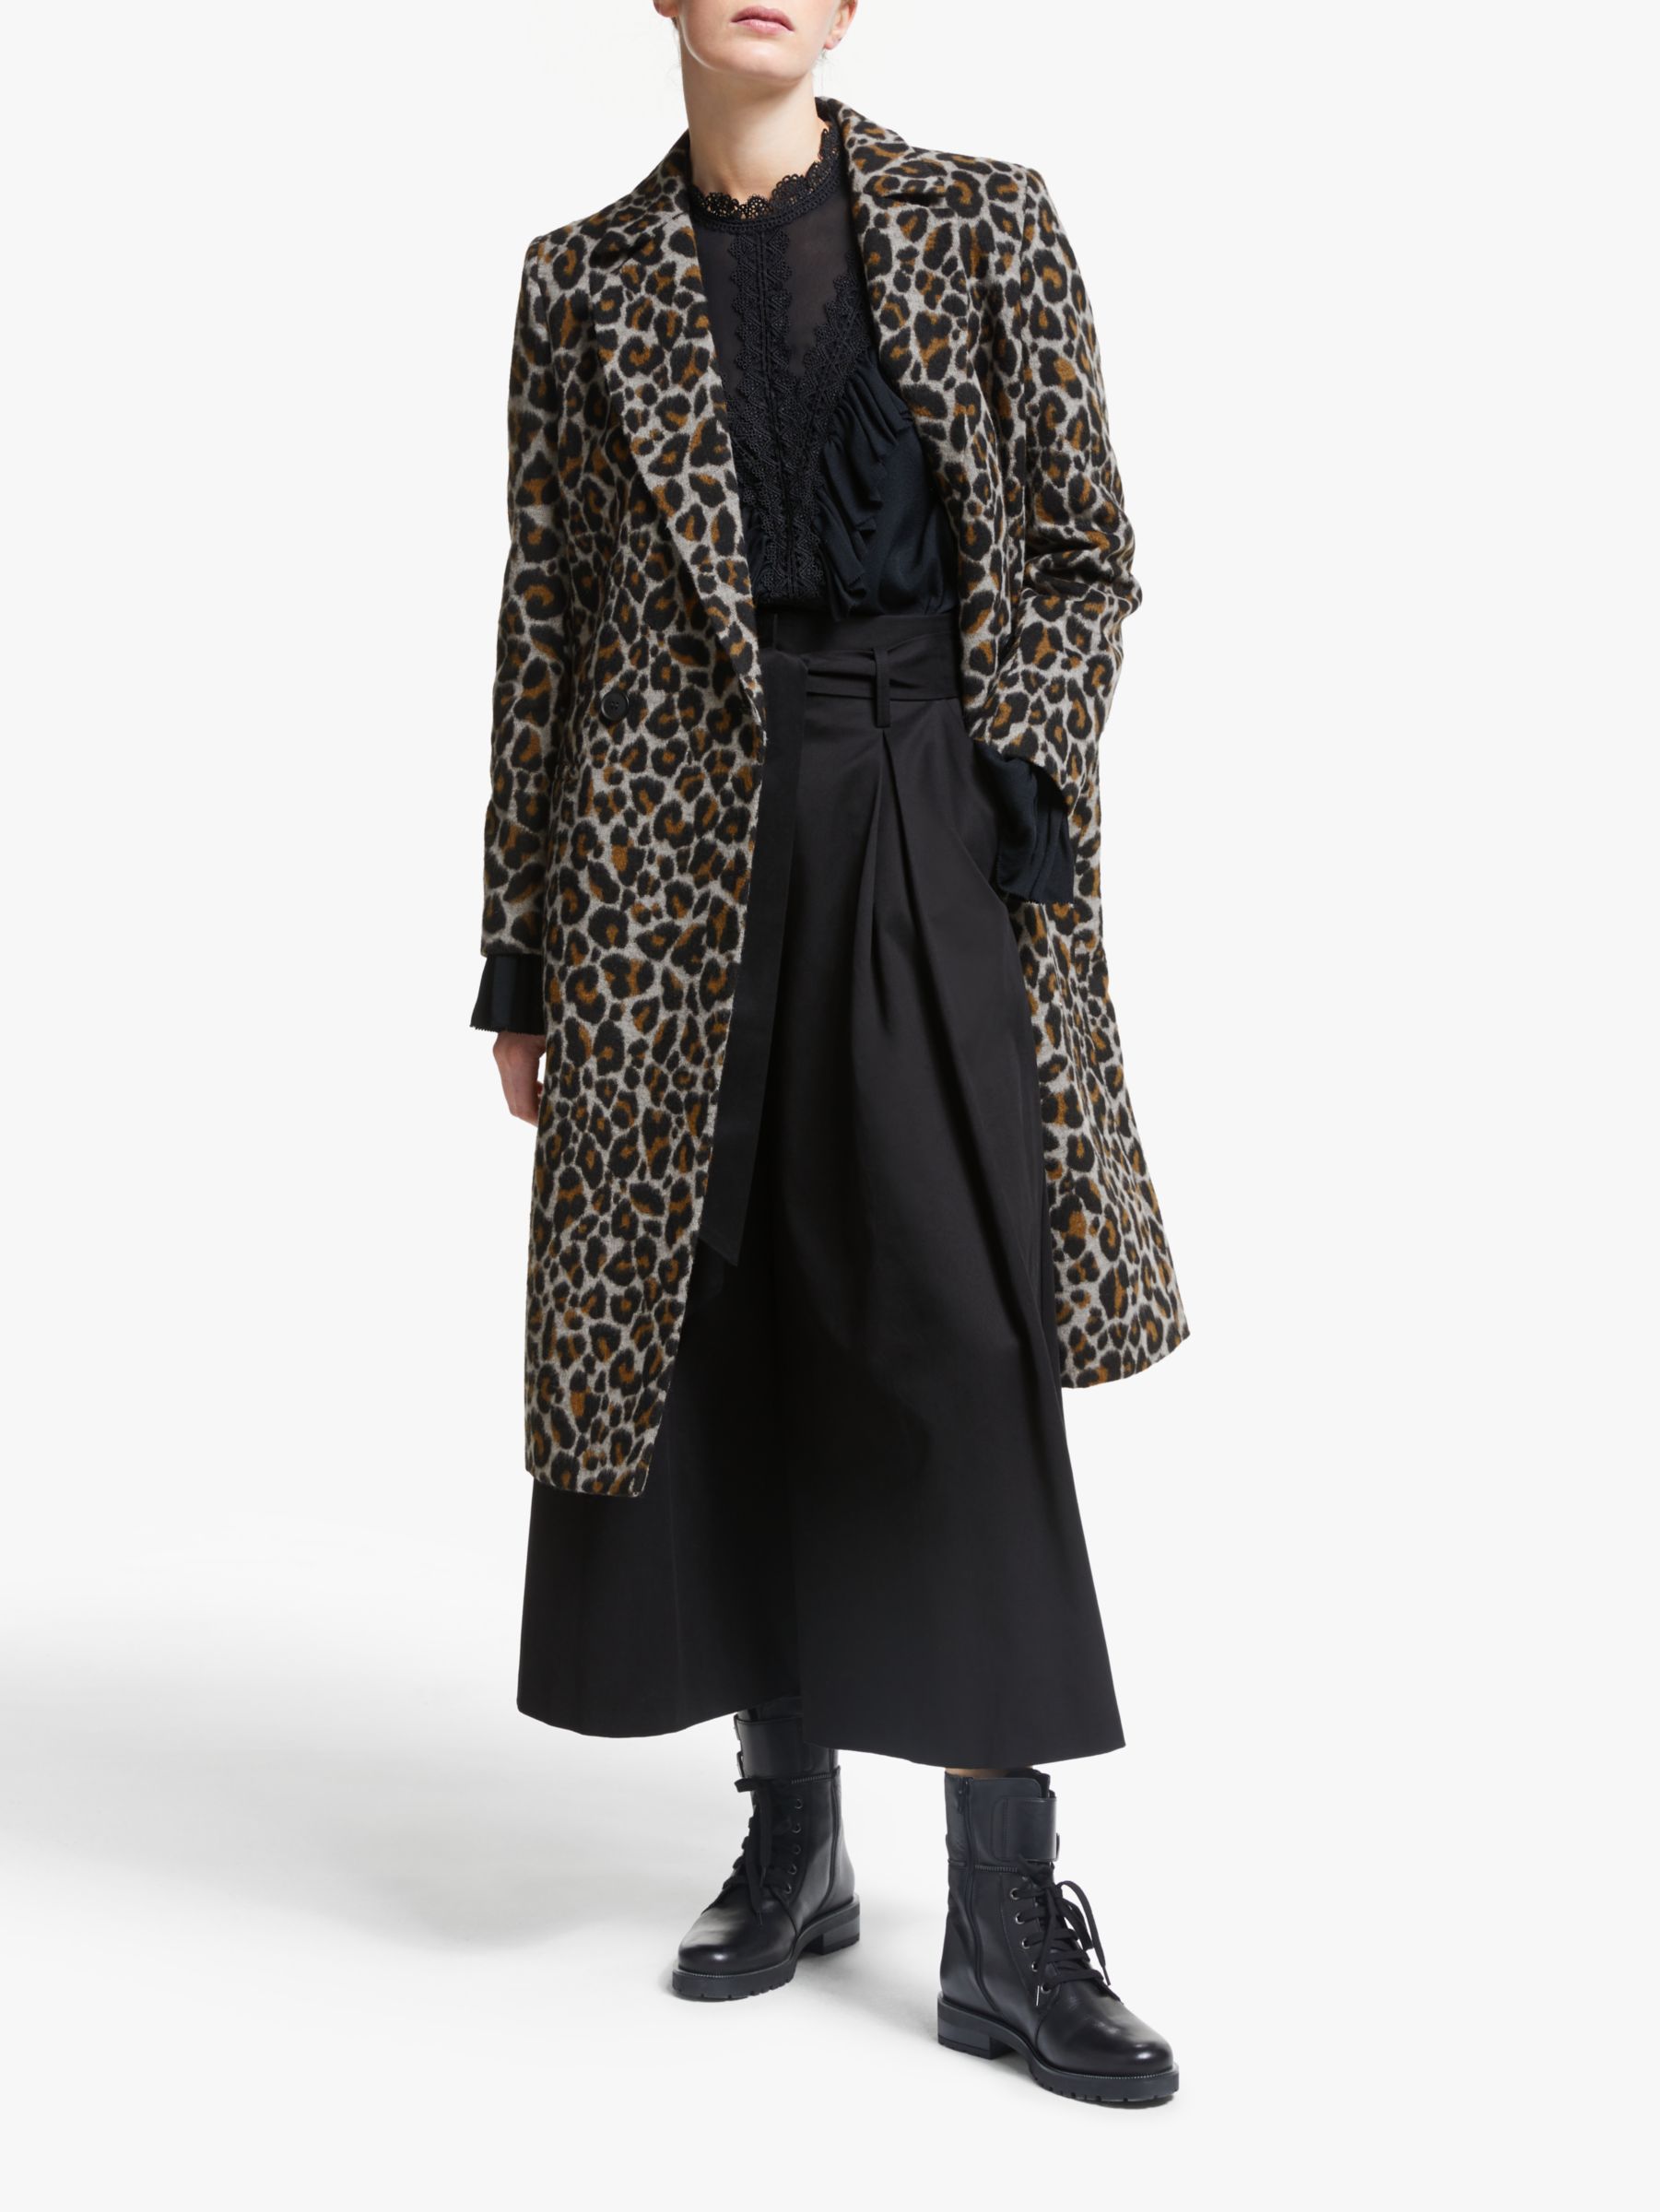 Somerset by Alice Temperley Leopard Print Double Breasted Coat, Brown